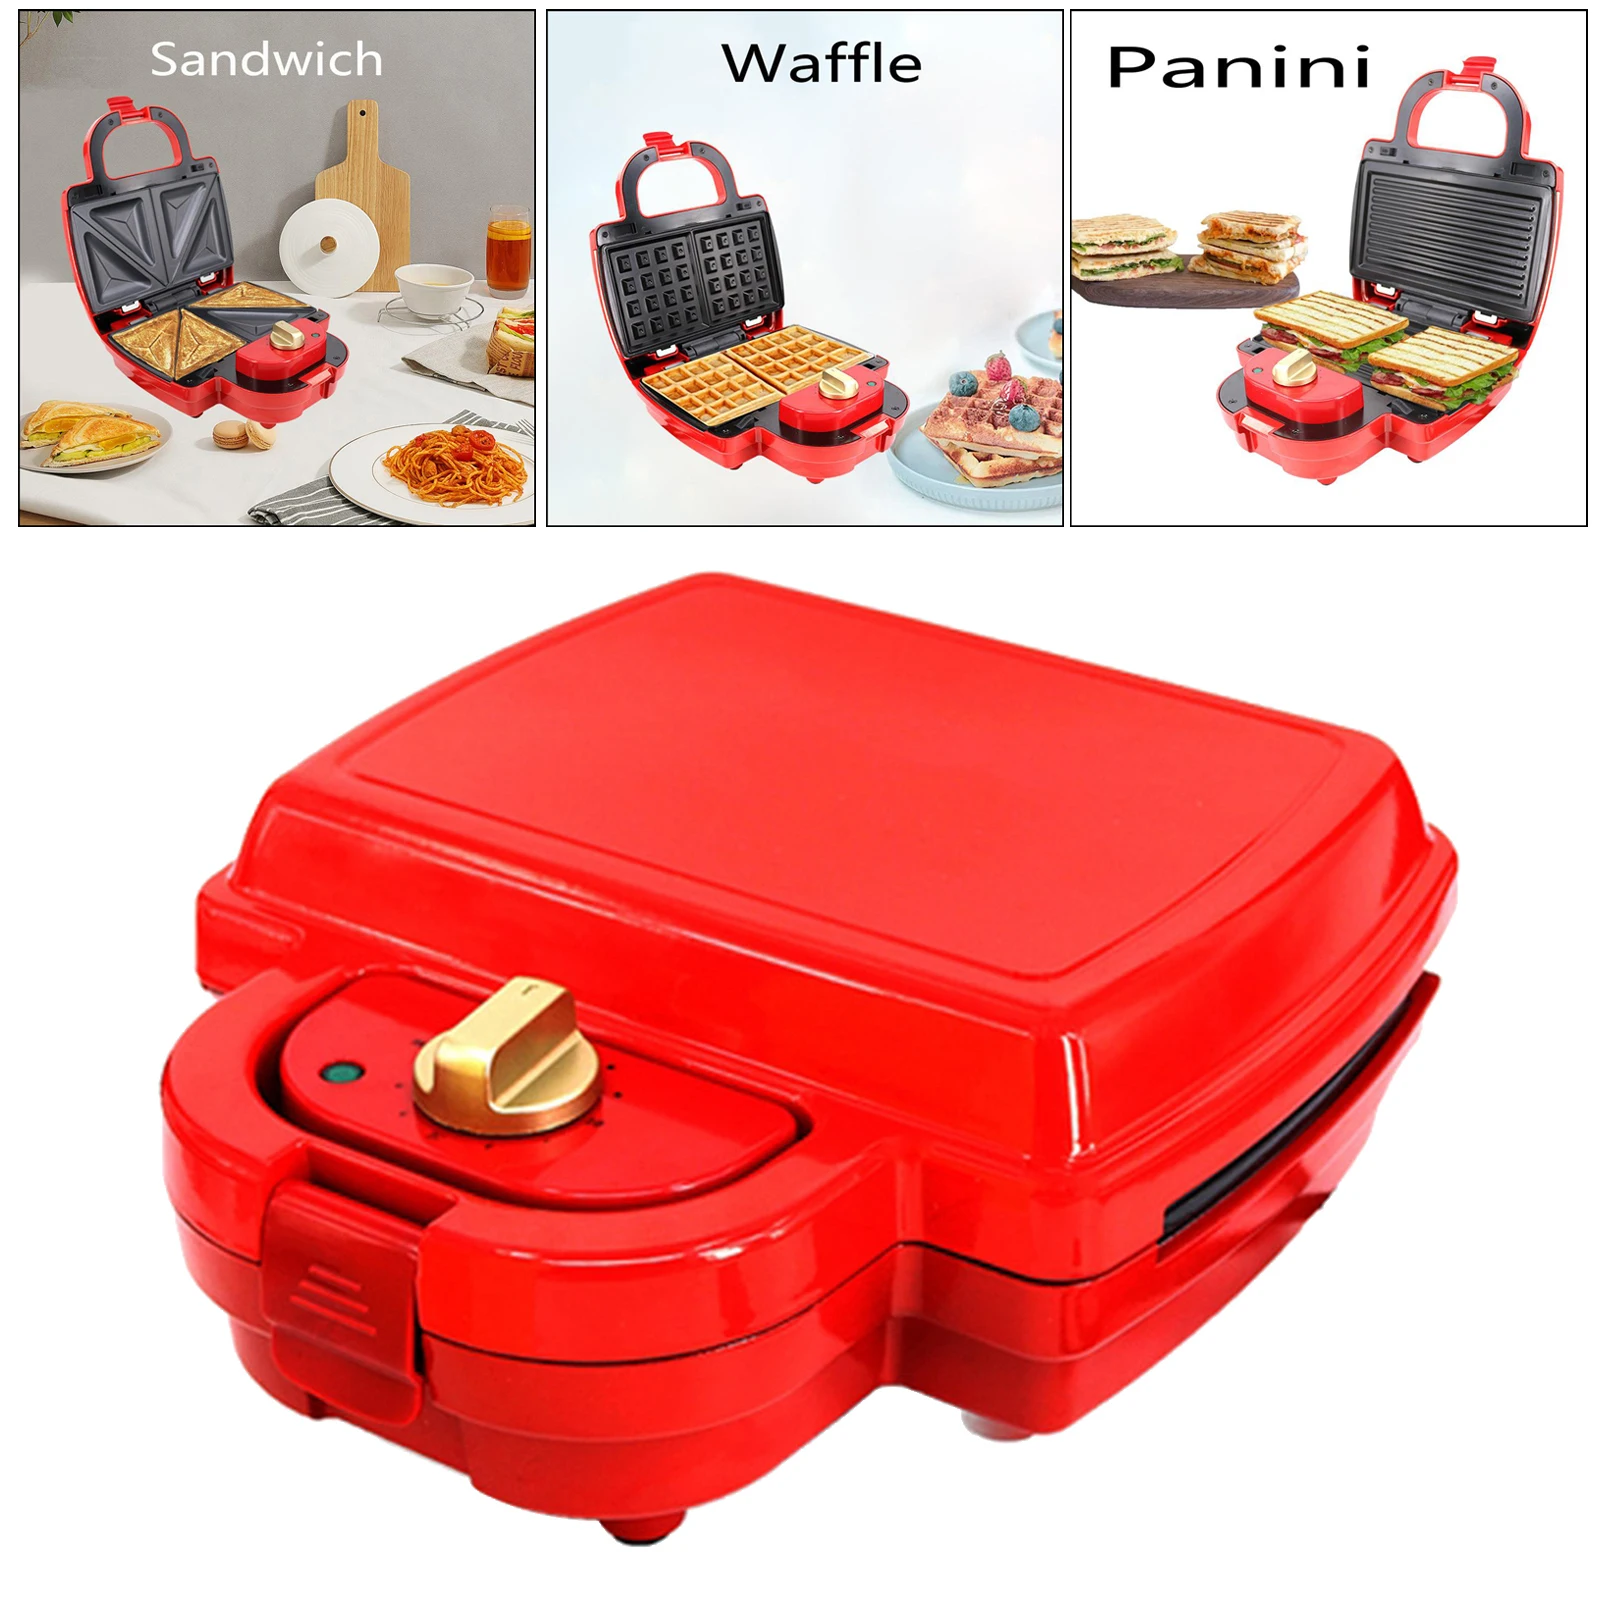 

3in1 Electric Sandwich Waffle Maker Grill Convenient 750W EU Plug Gifts